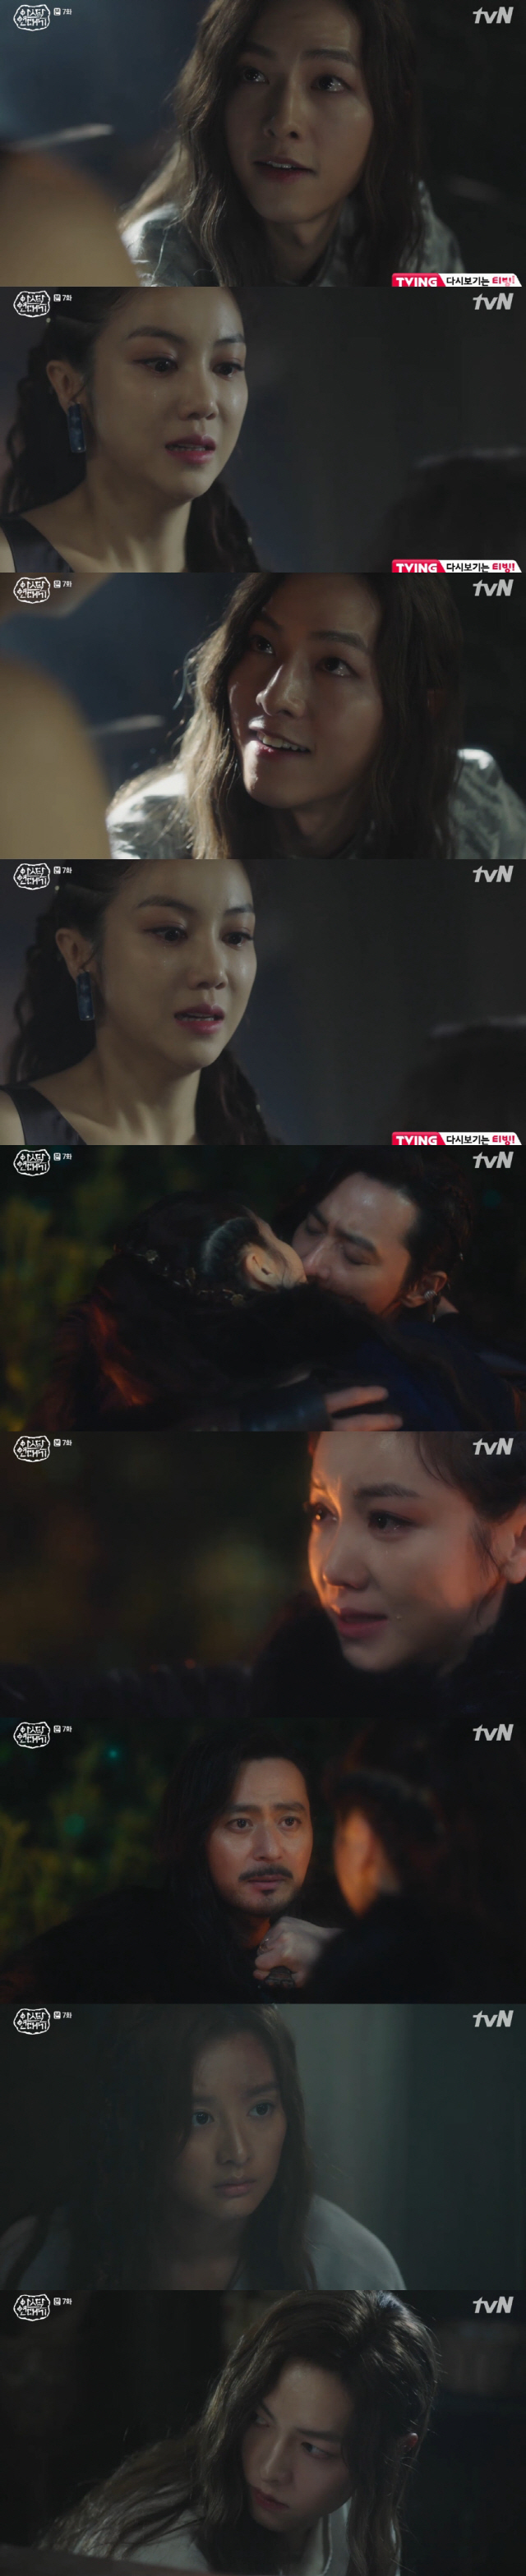 Song Joong-ki of the Asdal Chronicles took revenge on Kim Ok-bin.In the TVN weekend drama Asdal Chronicle (playplayplay by Park Sang-yeon/directed by Kim Won-seok), which was broadcast on the afternoon of the 22nd, Saya (Song Joong-ki) and Tanya (Kim Ji-won) met.On this day, Tanya encountered her twin brother, Saya, of the silver island (Song Joong-ki), at the top of the tower of fire; Tanya knew that Sayas lip color was Igt and asked, Who are you?Tagon (Jang Dong-gun) found Saya with Tanya; Tagon killed a unit member who found out that his son Saya was Igt.Tagon, who killed the unit, was angry at Saya, saying, How many more brothers should I kill because of you?Tagon knocked Tanya out and took her to Taealha (Kim Ok-bin); Tagon told Taealha that Tanya had learned of the identity of Saya; Tanya said, Dont bother the bird anymore.This was a dream of silver island, so Tanya could save his life.Sayas sick past, which was entangled in Sunnarae, was also revealed; the past Saya had a female body called the Birdnarae in mind; she planned to run away at night after filling her bracelet with the Birdnara.However, Taealha, who had noticed this in advance, killed the new Europe and returned the bloody bracelet to Saya.After hearing the dream story of Tanya, she went to Saya and asked, Do you think a lot these days? Do you blame me? Saya replied, I used to grumble, but now its okay.Taalha apologized to Saya for the matter; later Taalha brought Tanya to Sayas new body; Taalha told Hattuak, Its a new body, youre good at educating her.Its a Dusm student, what do you know? he ordered.The silver island (Park Hae-jun) that fell off the cliff was saved with the help of a white man, and the white man who learned that the silver island was Igt was the child of the prophecy and kept it alive.Mubaek learned through Chae Eun (the High Court) that the silver island had a necklace of Aṣahon (Chu Ja-hyeon), who said it was the necklace of Aṣahon.Tagon revealed to Aṣaron (Lee Do-kyung) that he had killed his father Sanung; Aṣaron suggested to Tagon (Jang Dong-gun) that he marry Aṣa as the federation customary.Tagon was worried about the situation of betraying Taealha. Tagon met Taealha (Kim Ok-bin) in the forest and delivered Aṣarons proposal.He pointed a knife at Tagons neck and said, Why do not you stop him and kill me? Tagon said, I can not do Aṣaron.The white mountain will not be there, and then Asdal is a civil war. Can we continue to be lovers? asked Tagon, tearing his eyes, and Tagon confessed with sincerity, I hope so. The two even shared a sweet kiss.But when she returned home, she changed her mind. She planned to assassinate Aṣaron with Tagon.Aṣaron, who ate non-bichusan, lived well, and the short wall (Park Byung-eun) showed signs of critical illness while pouring blood while speaking.It turned out that Saya had set up to revenge for Taealha, who went to Saya and asked, Is it you? Saya reminded her of the death of the bird, saying, Now we have exchanged.You lost the man I wanted, the man I liked. Now hes marrying that Aṣa woman, and you lost her.I wanted to do it, he grinned.Meanwhile, The Asdal Chronicle is the fateful story of heroes writing different legends in the ancient land Ass. It airs every Saturday and Sunday at 9 p.m.